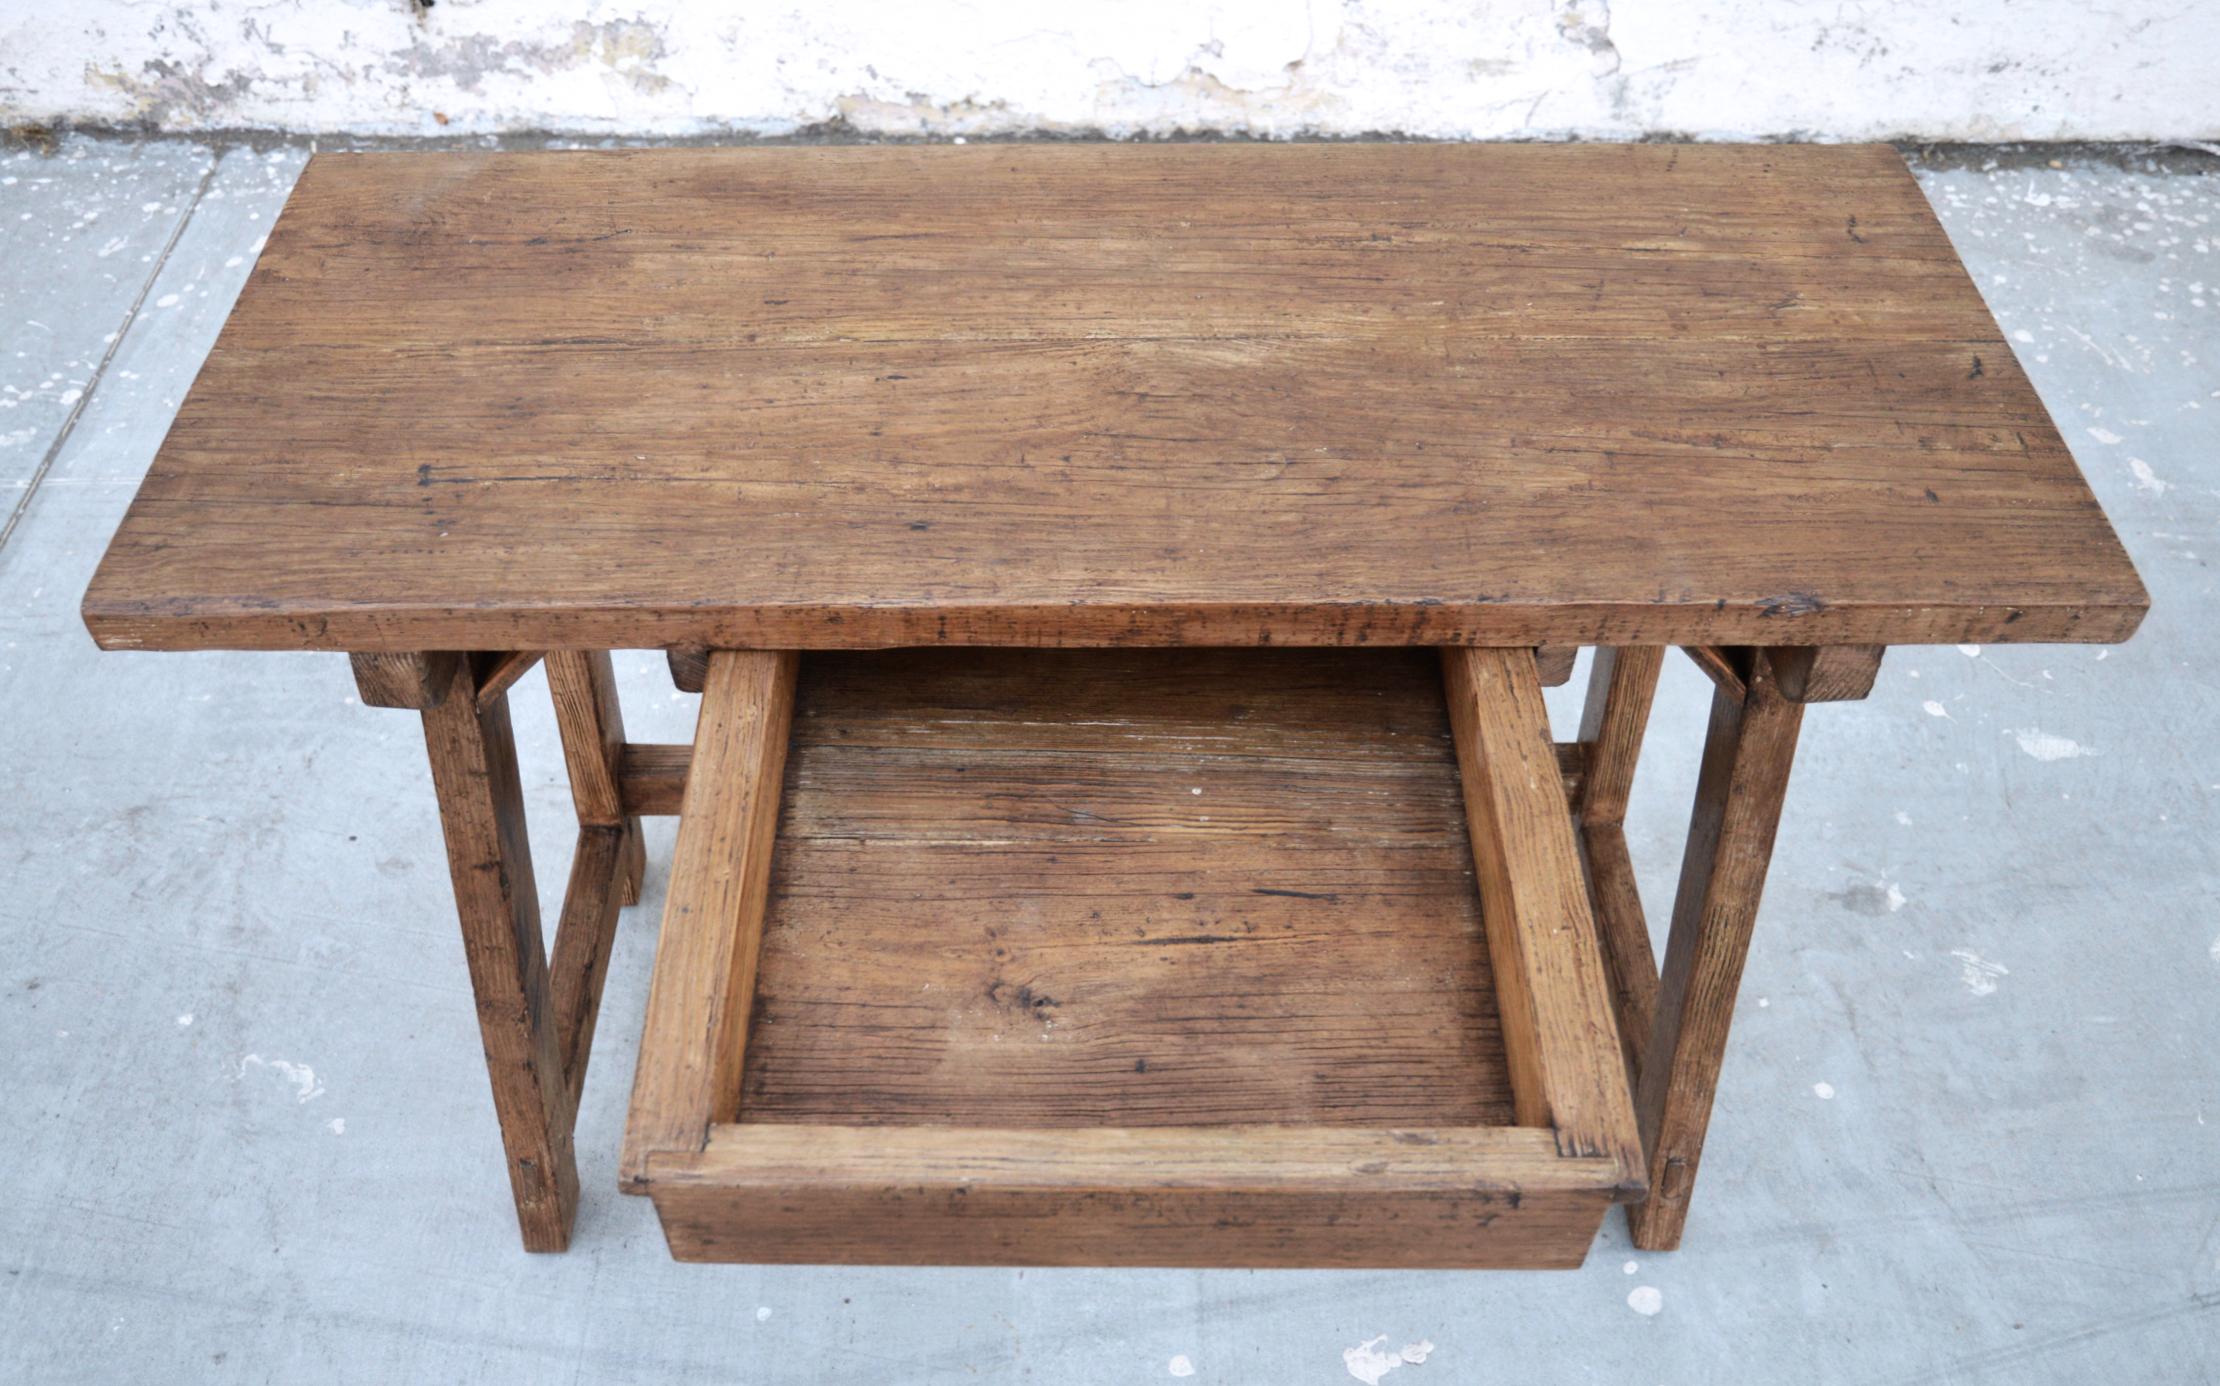 Hand-Crafted Custom Desk or Writing Table Made from Reclaimed Pine